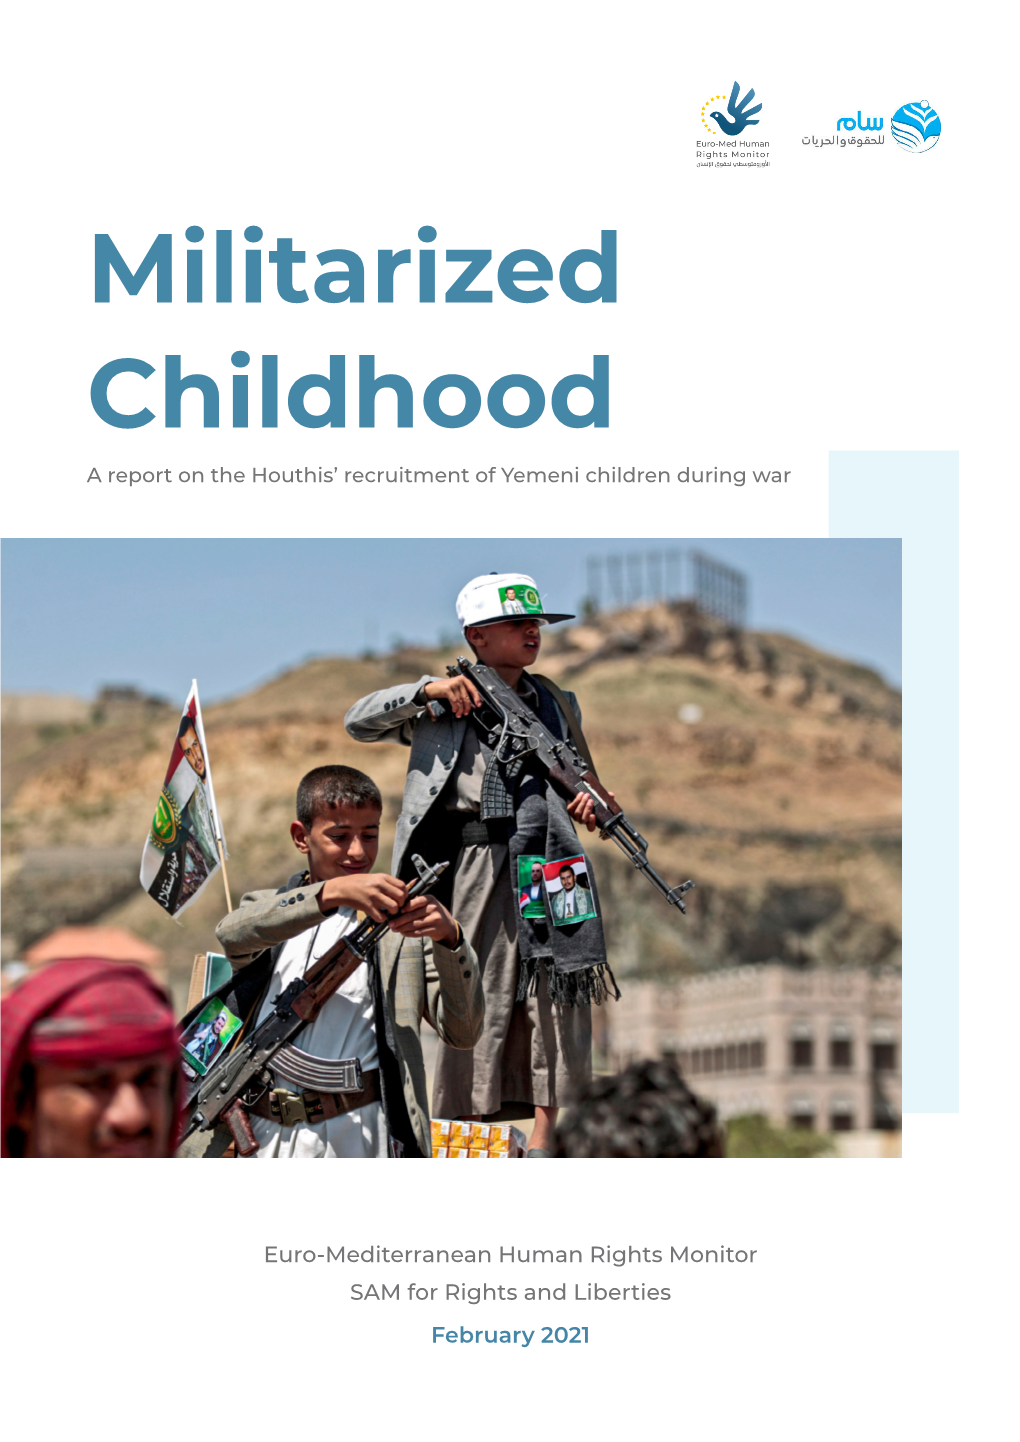 Militarized Childhood a Report on the Houthis’ Recruitment of Yemeni Children During War